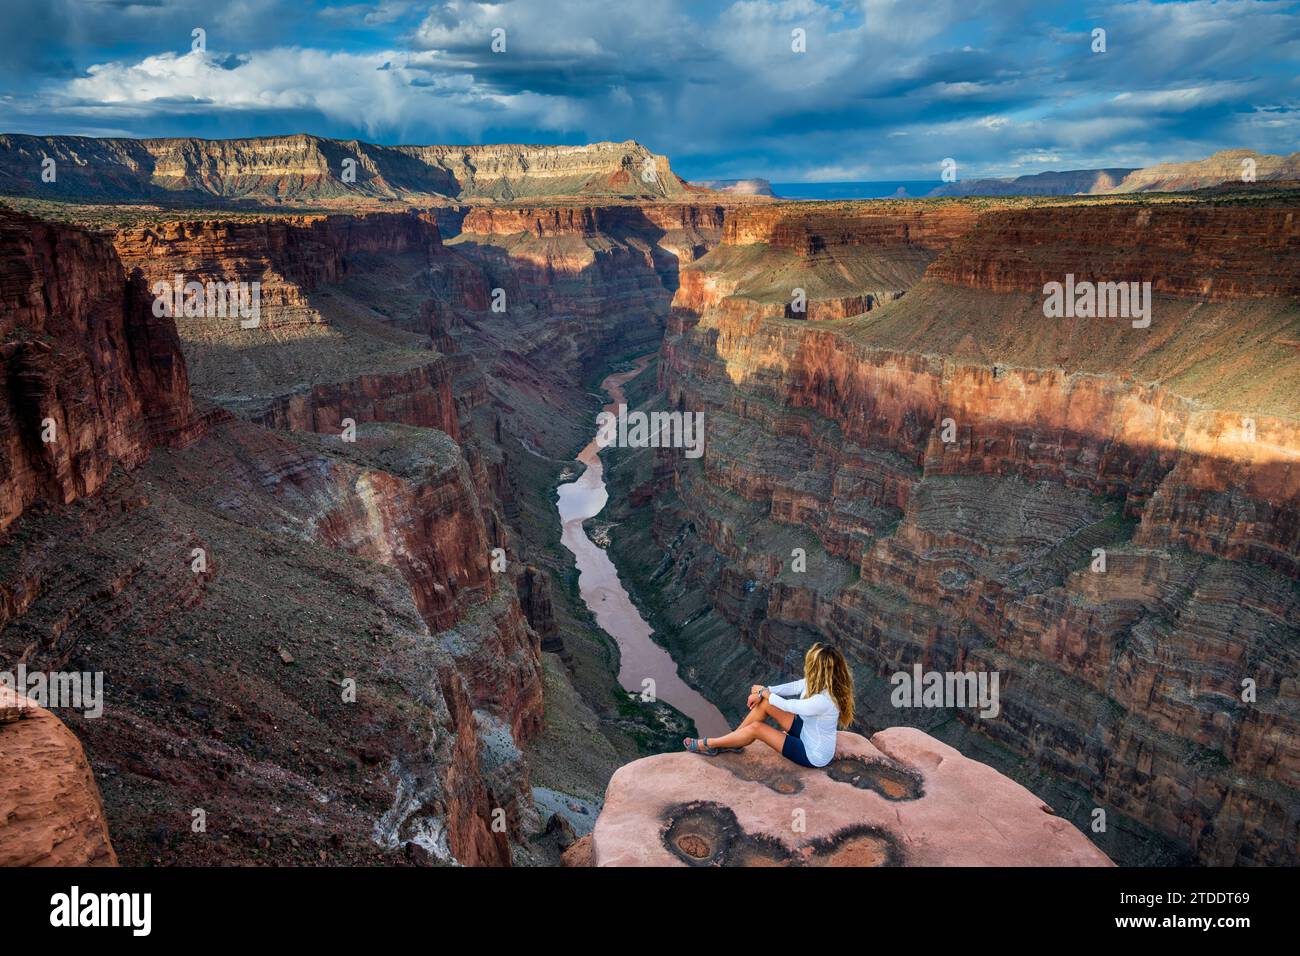 Woman Sitting and Looking out over the Grand Canyon Stock Photo